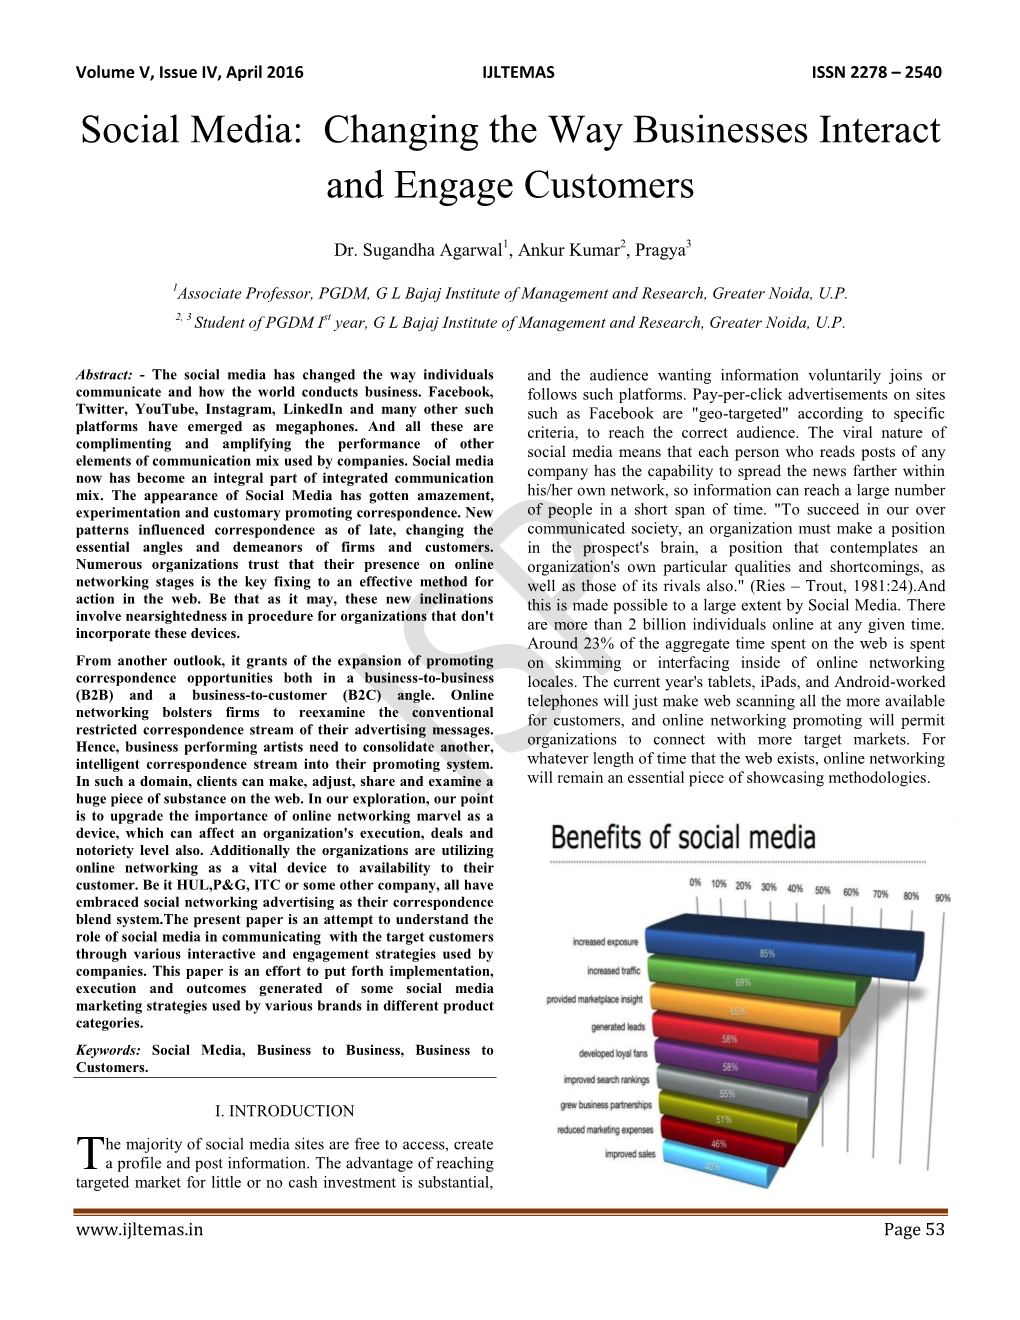 Social Media: Changing the Way Businesses Interact and Engage Customers